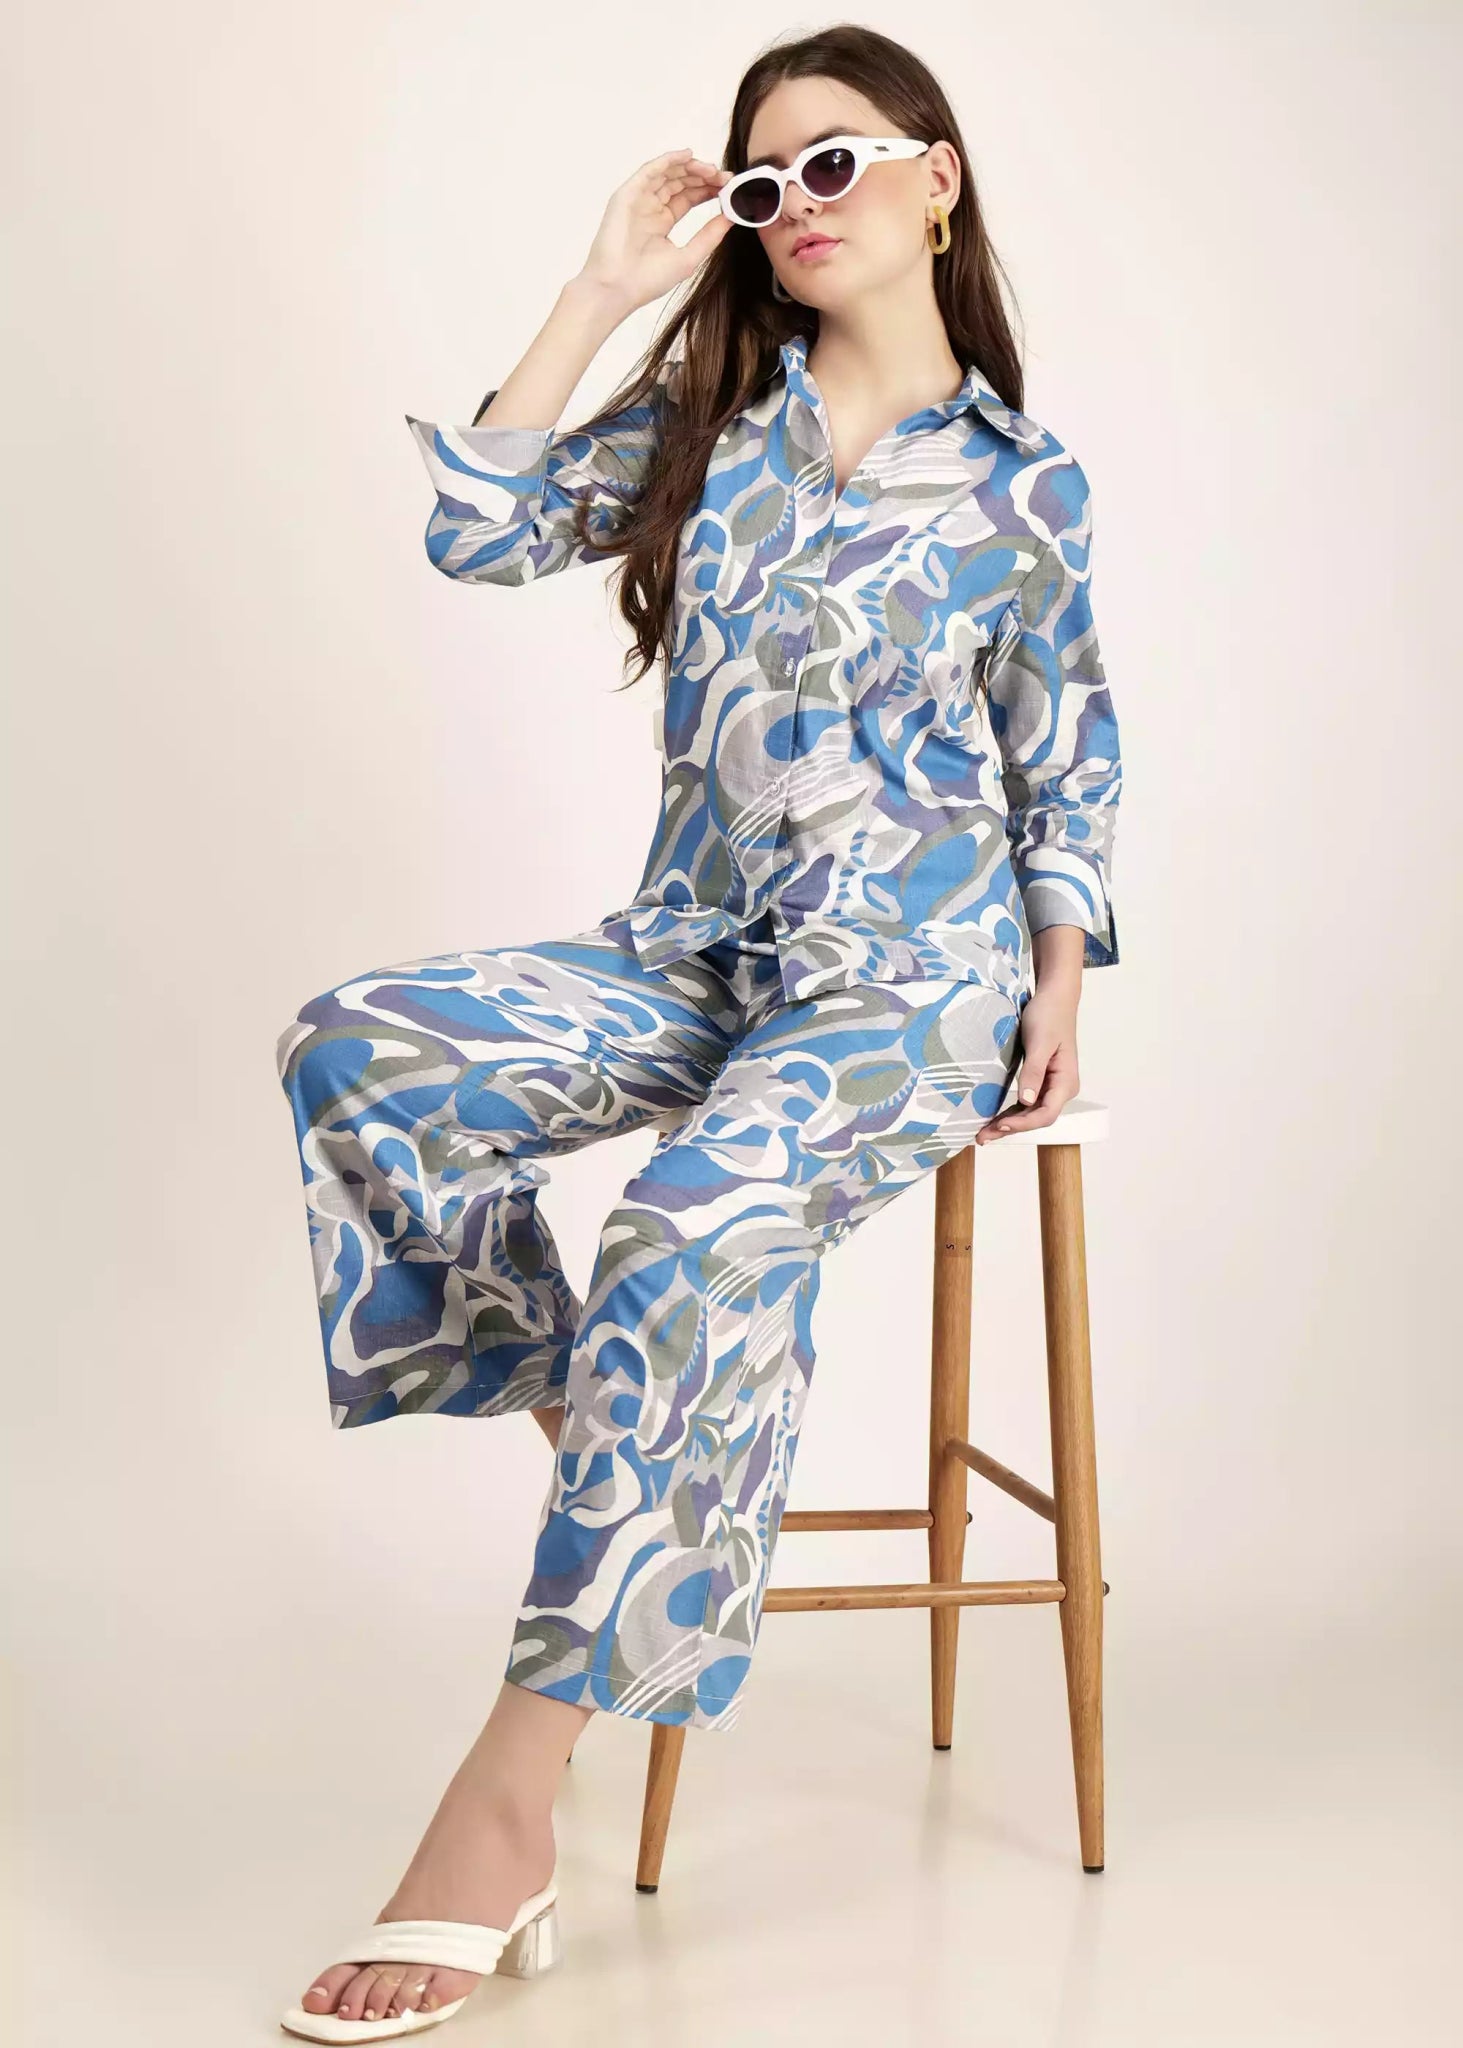 Women Blue Color Abstract Printed Cotton Co-ord Set - GargiStyle